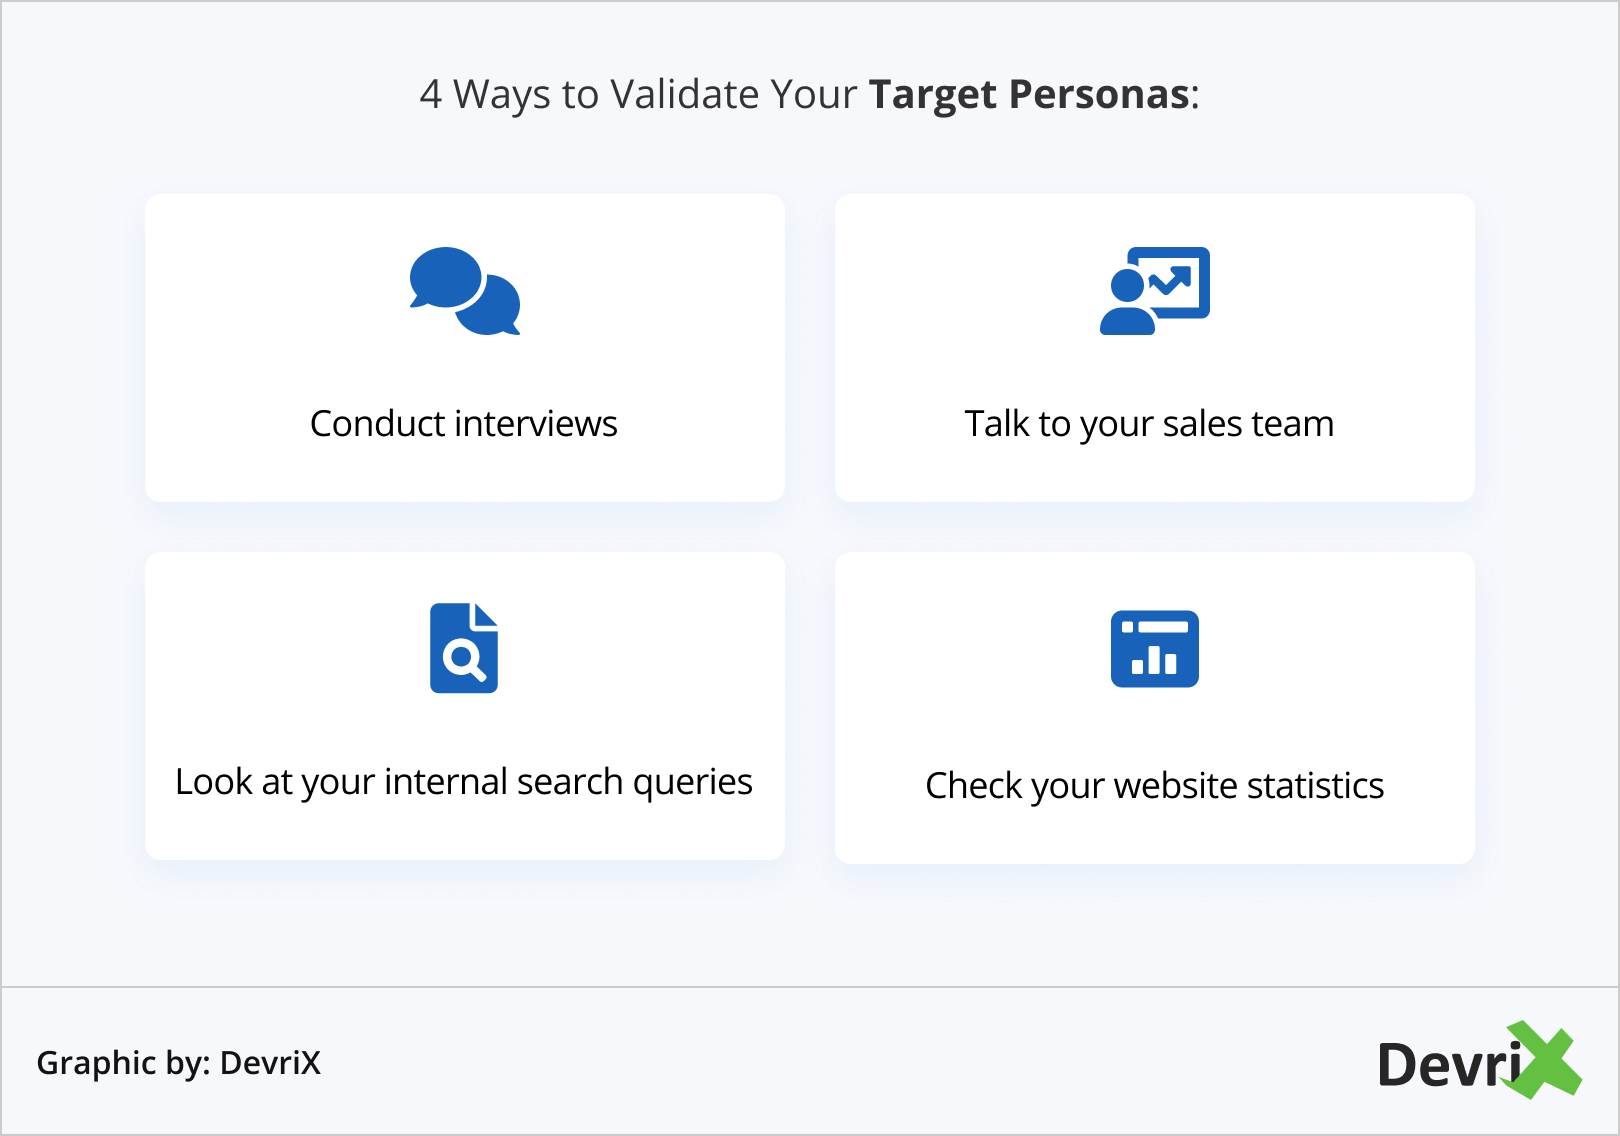 4 Ways to Validate Your Target Personas